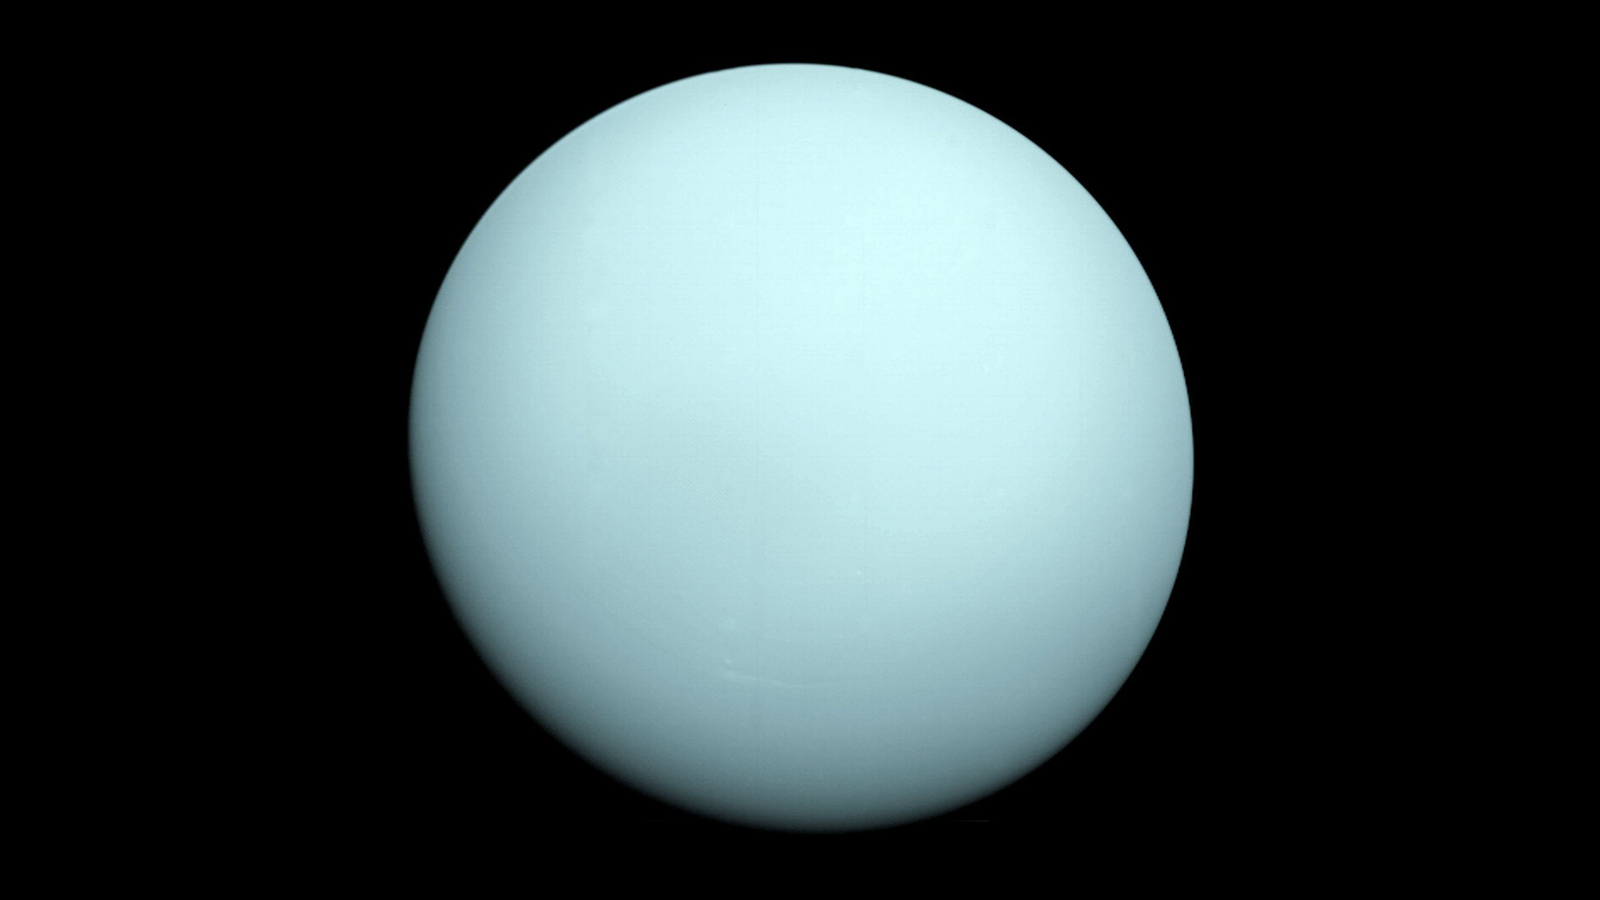 Uranus Images Browse 30139 Stock Photos  Vectors Free Download with  Trial  Shutterstock